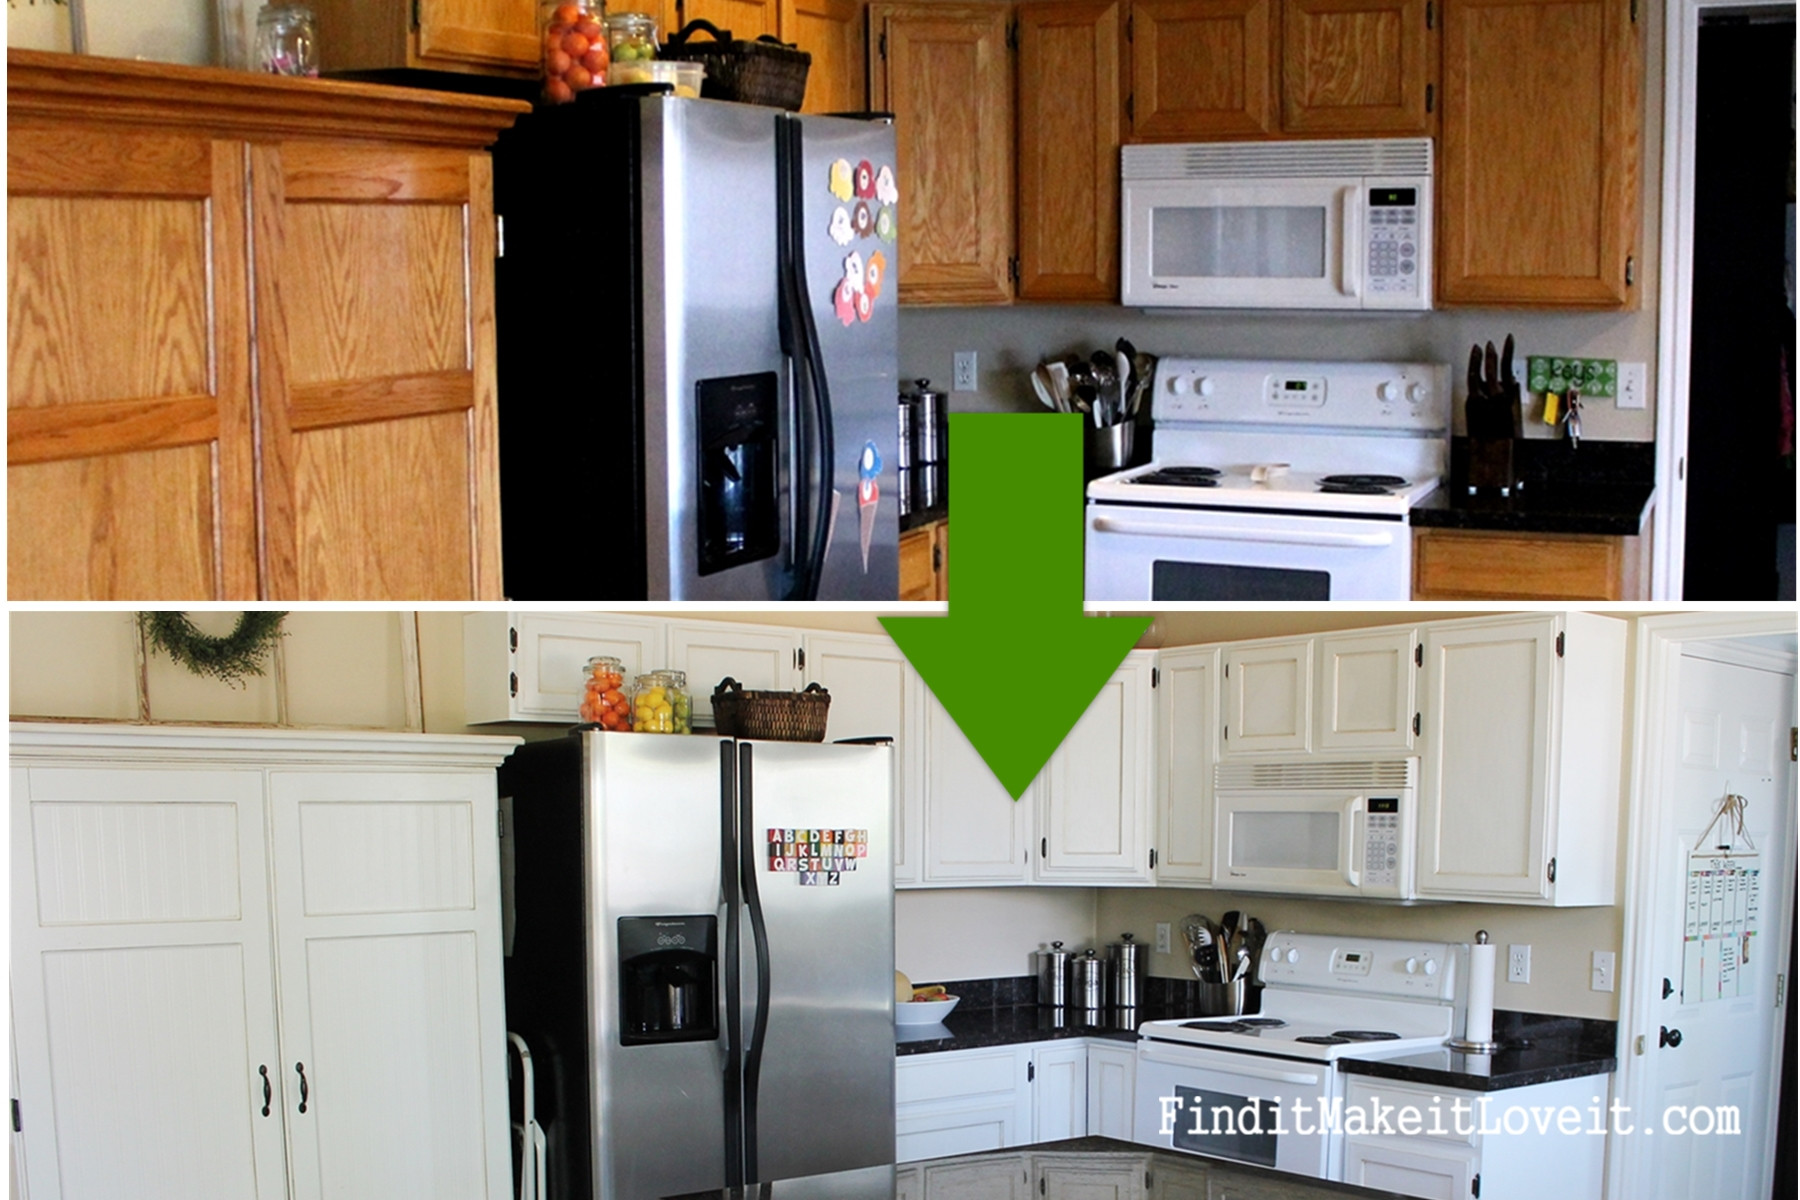 Best ideas about Painting Cabinets DIY
. Save or Pin $150 Kitchen Cabinet Makeover Find it Make it Love it Now.